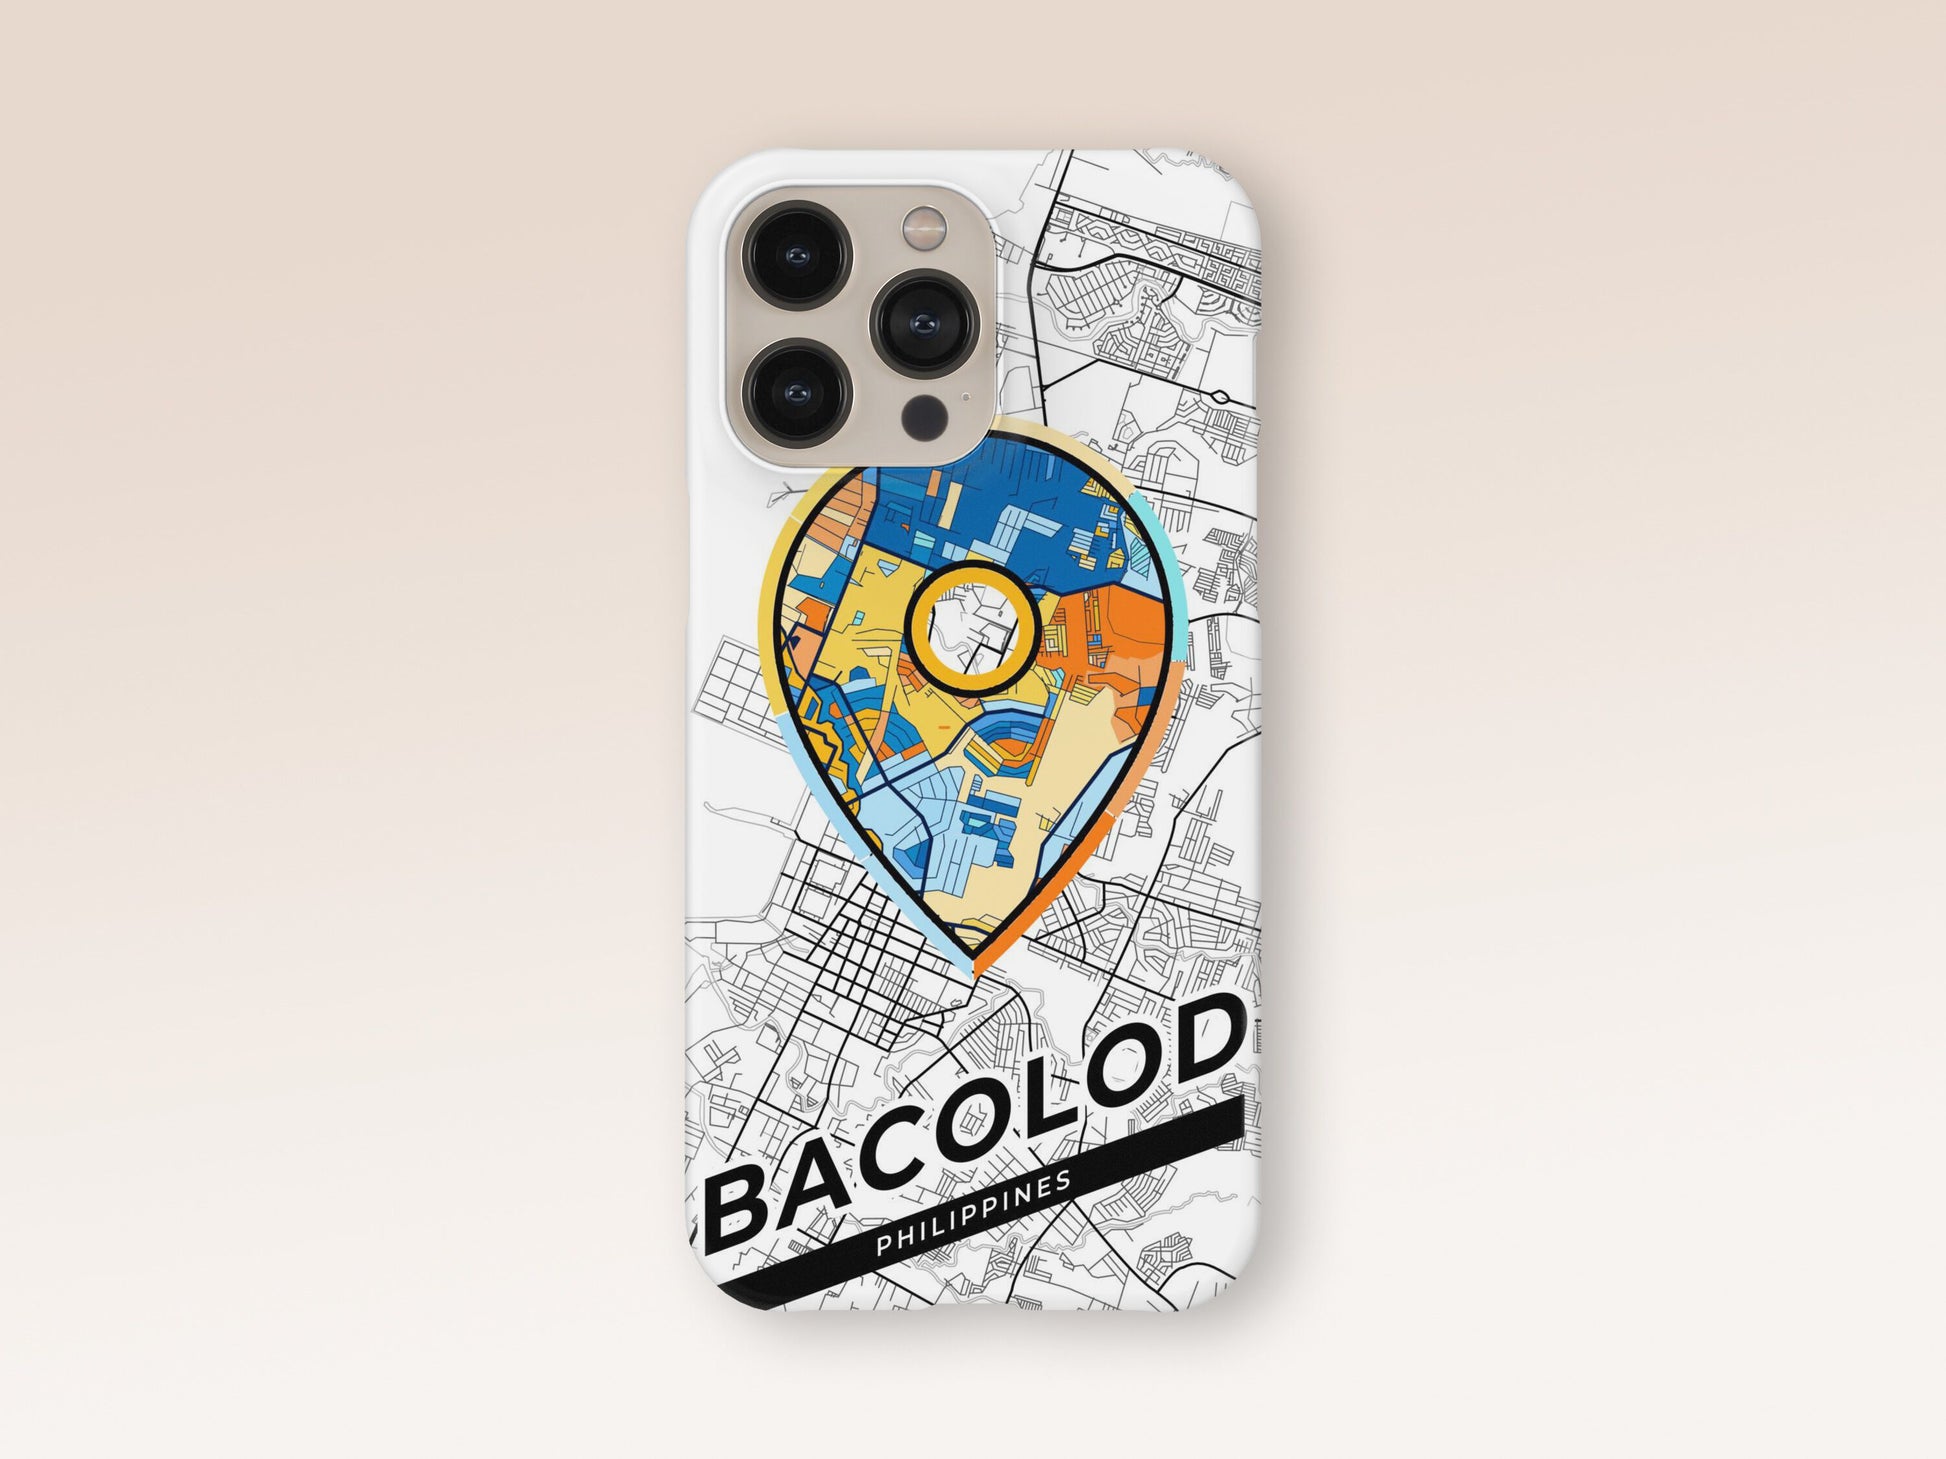 Bacolod Philippines slim phone case with colorful icon. Birthday, wedding or housewarming gift. Couple match cases. 1